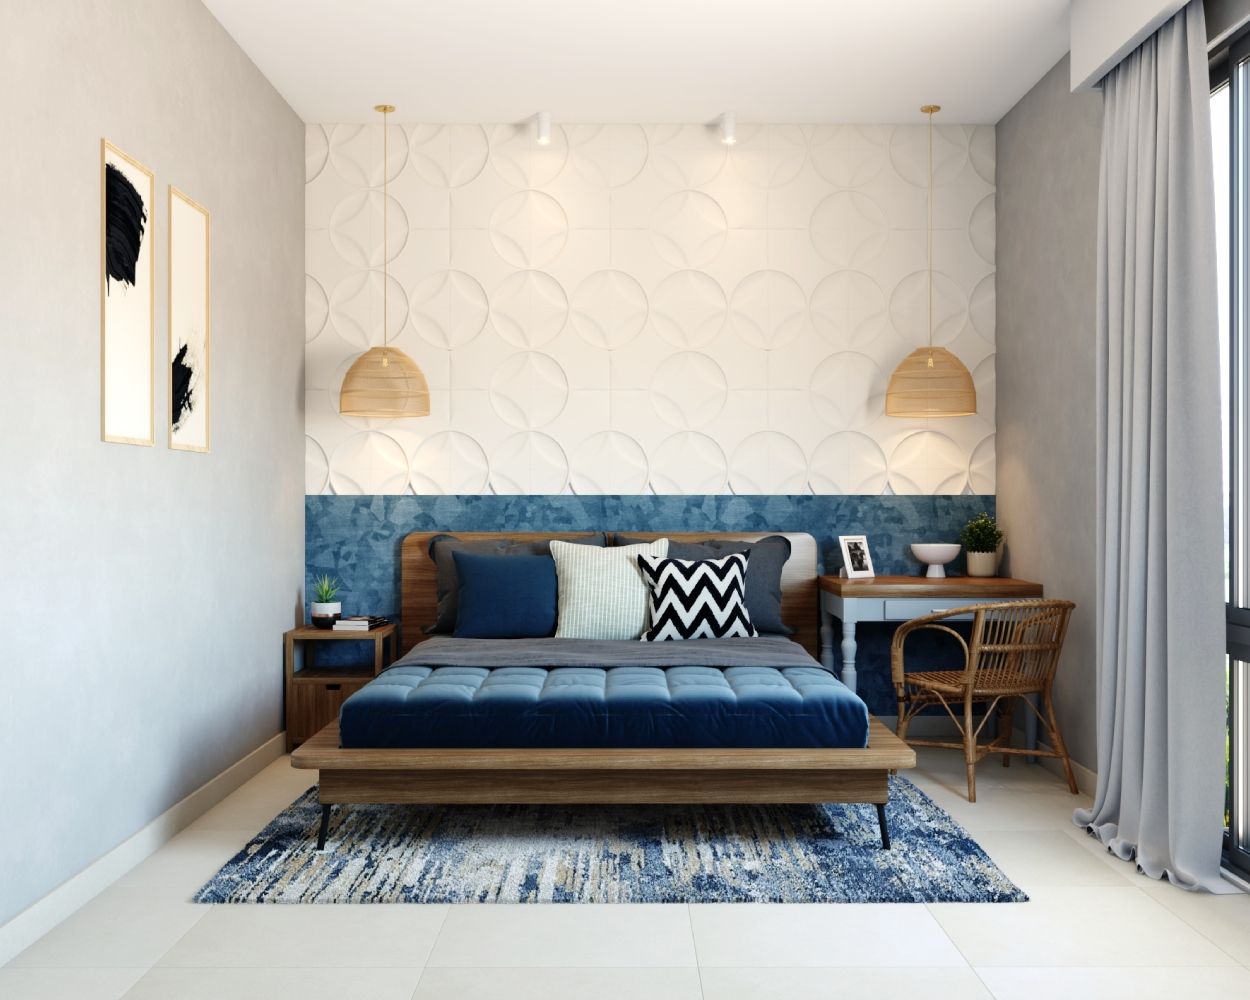 Coastal White And Blue Geometric Bedroom Wall Design With Wallpaper